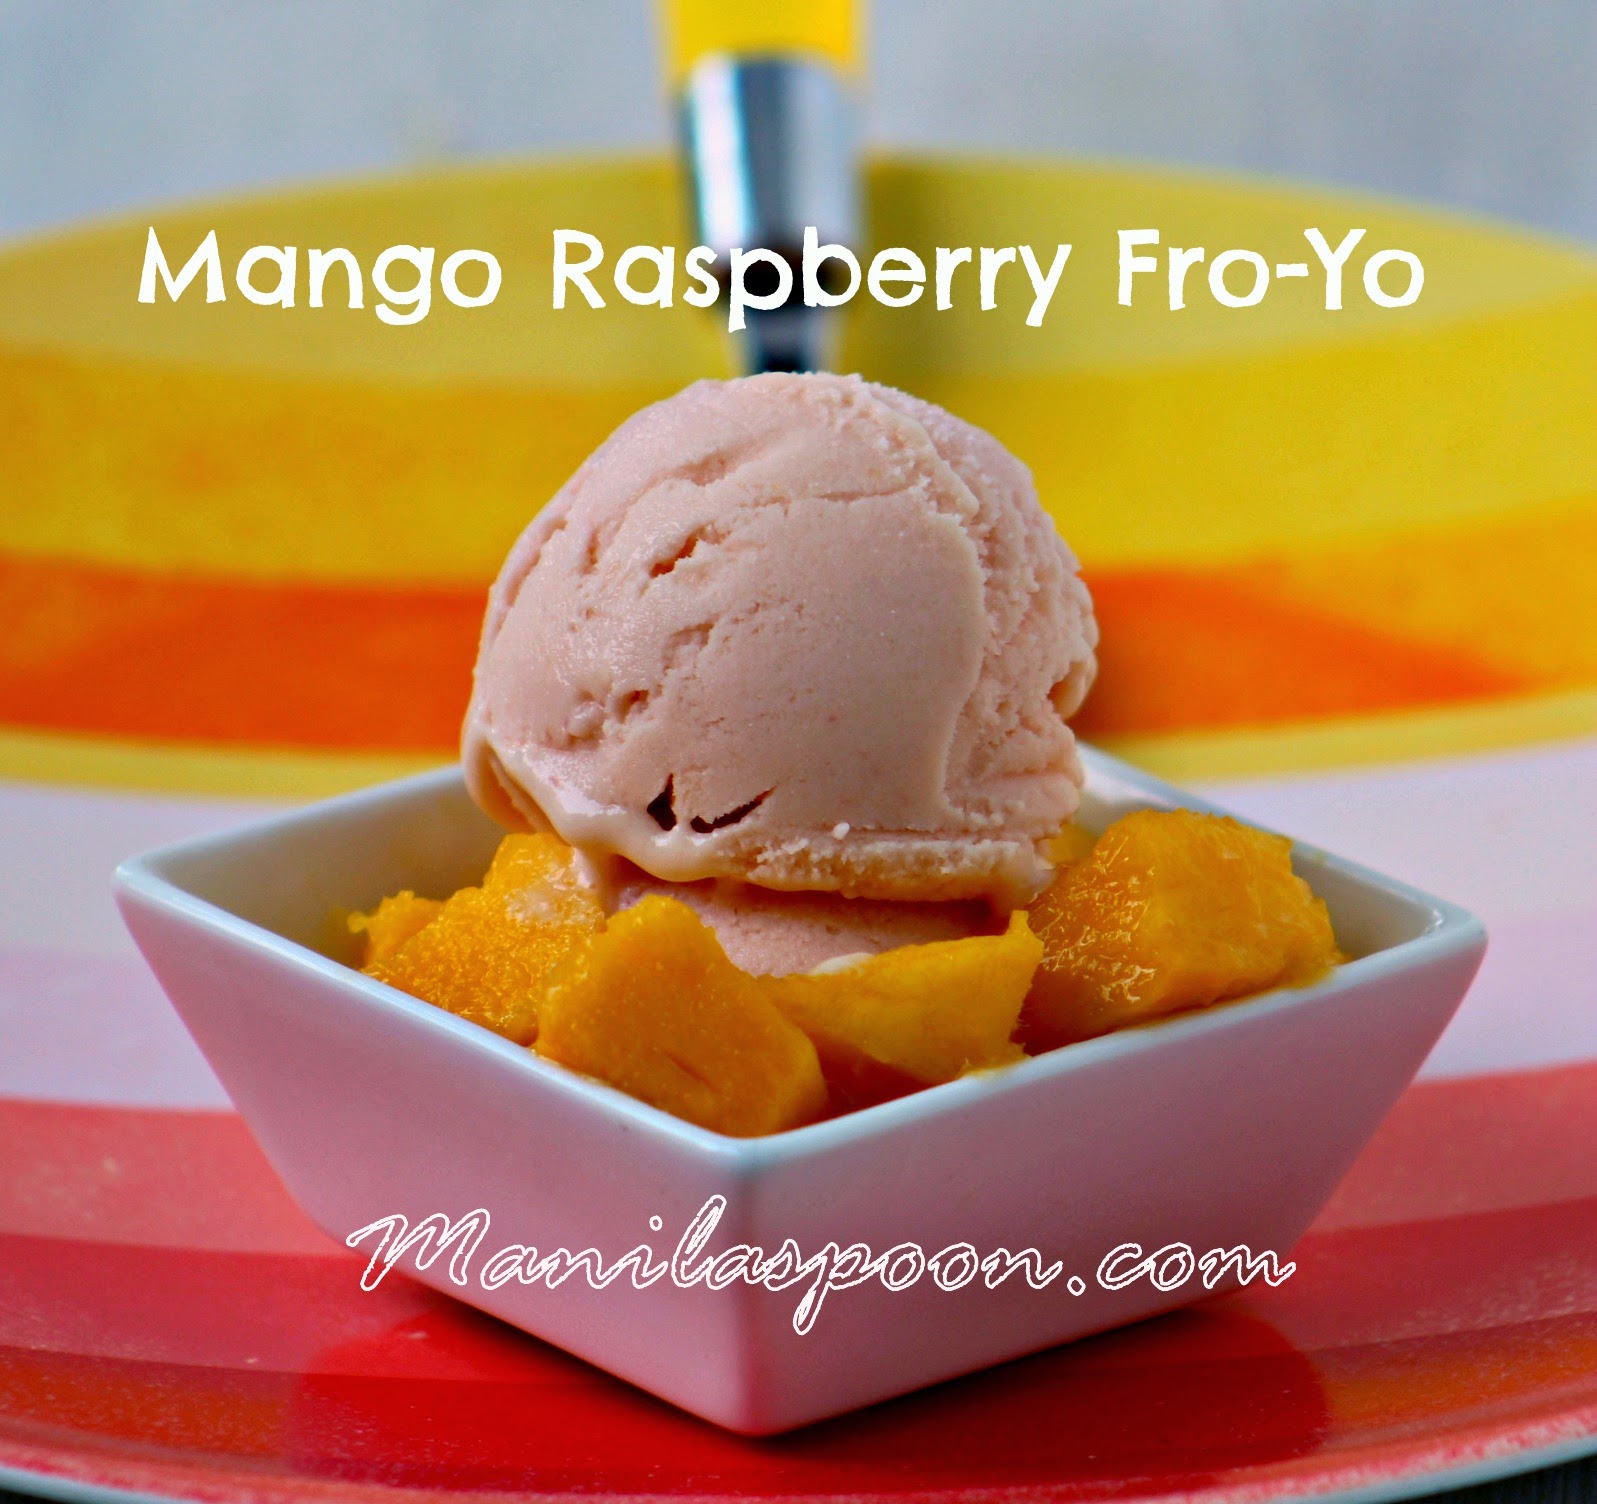 No need for an ice cream maker to make this easy, refreshing and scrumptious Mango Raspberry frozen yogurt! Sweet mangoes and tangy raspberries will keep you deliciously cool this summer!